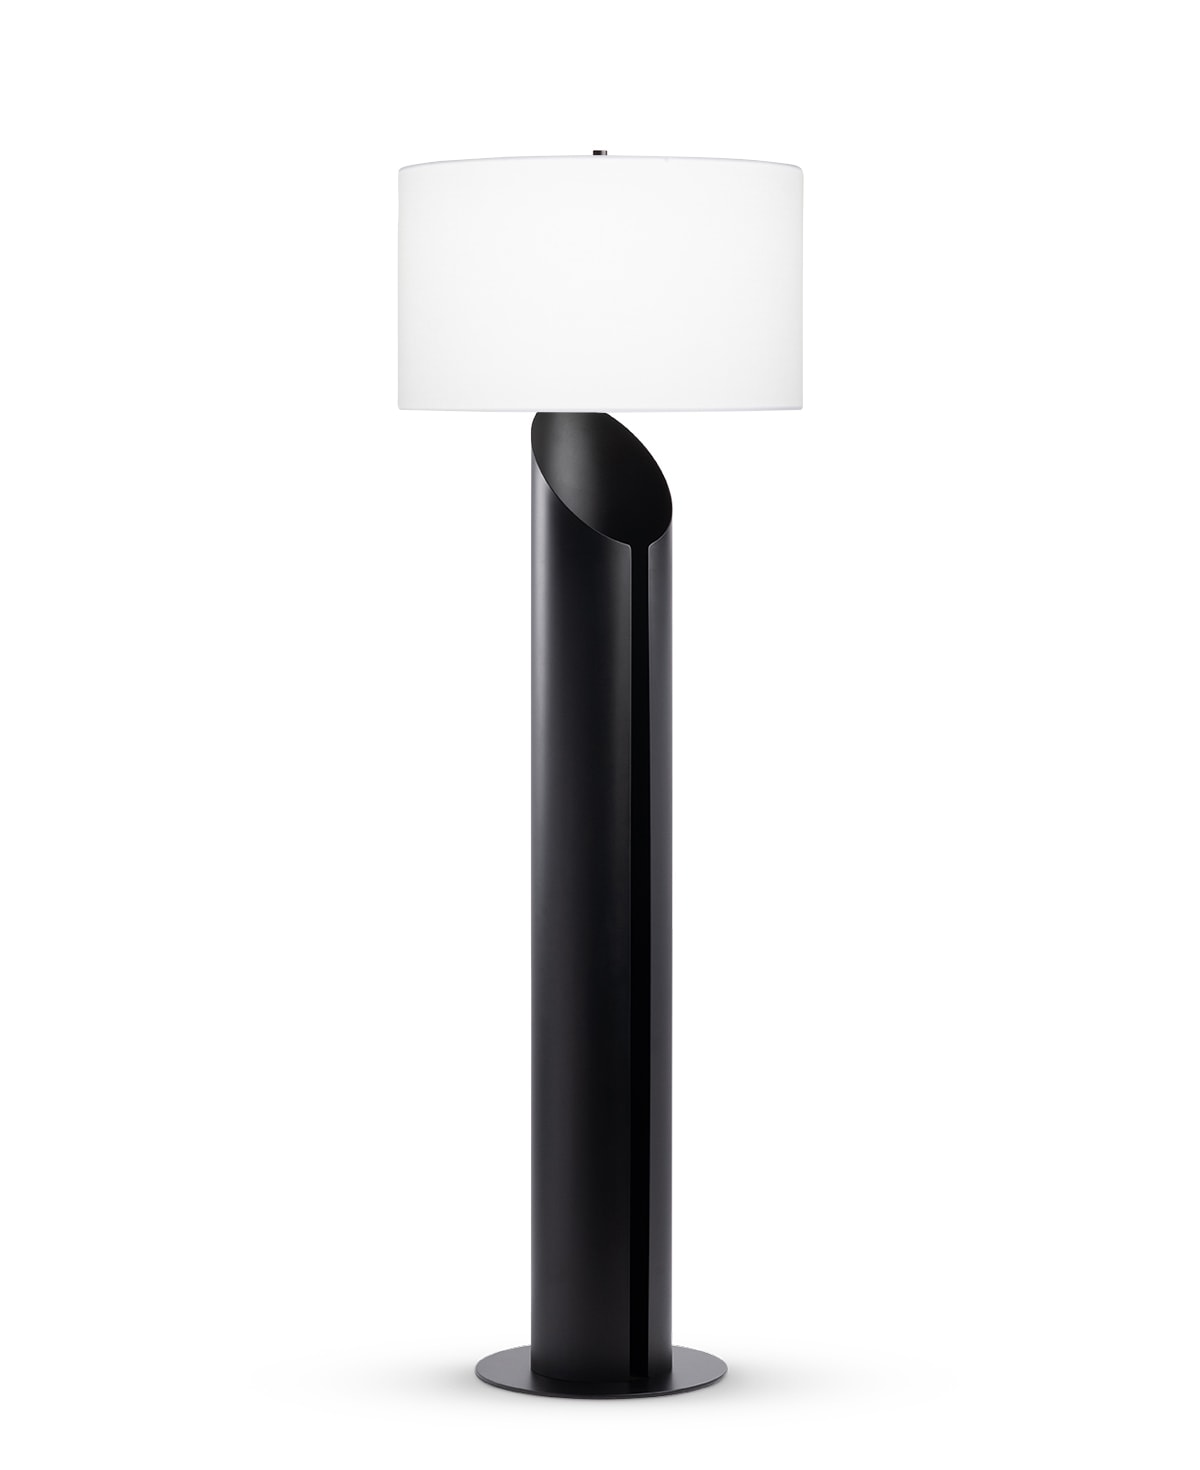 FlowDecor Jade Floor Lamp in metal with black matte finish and white linen drum shade (# 4624)